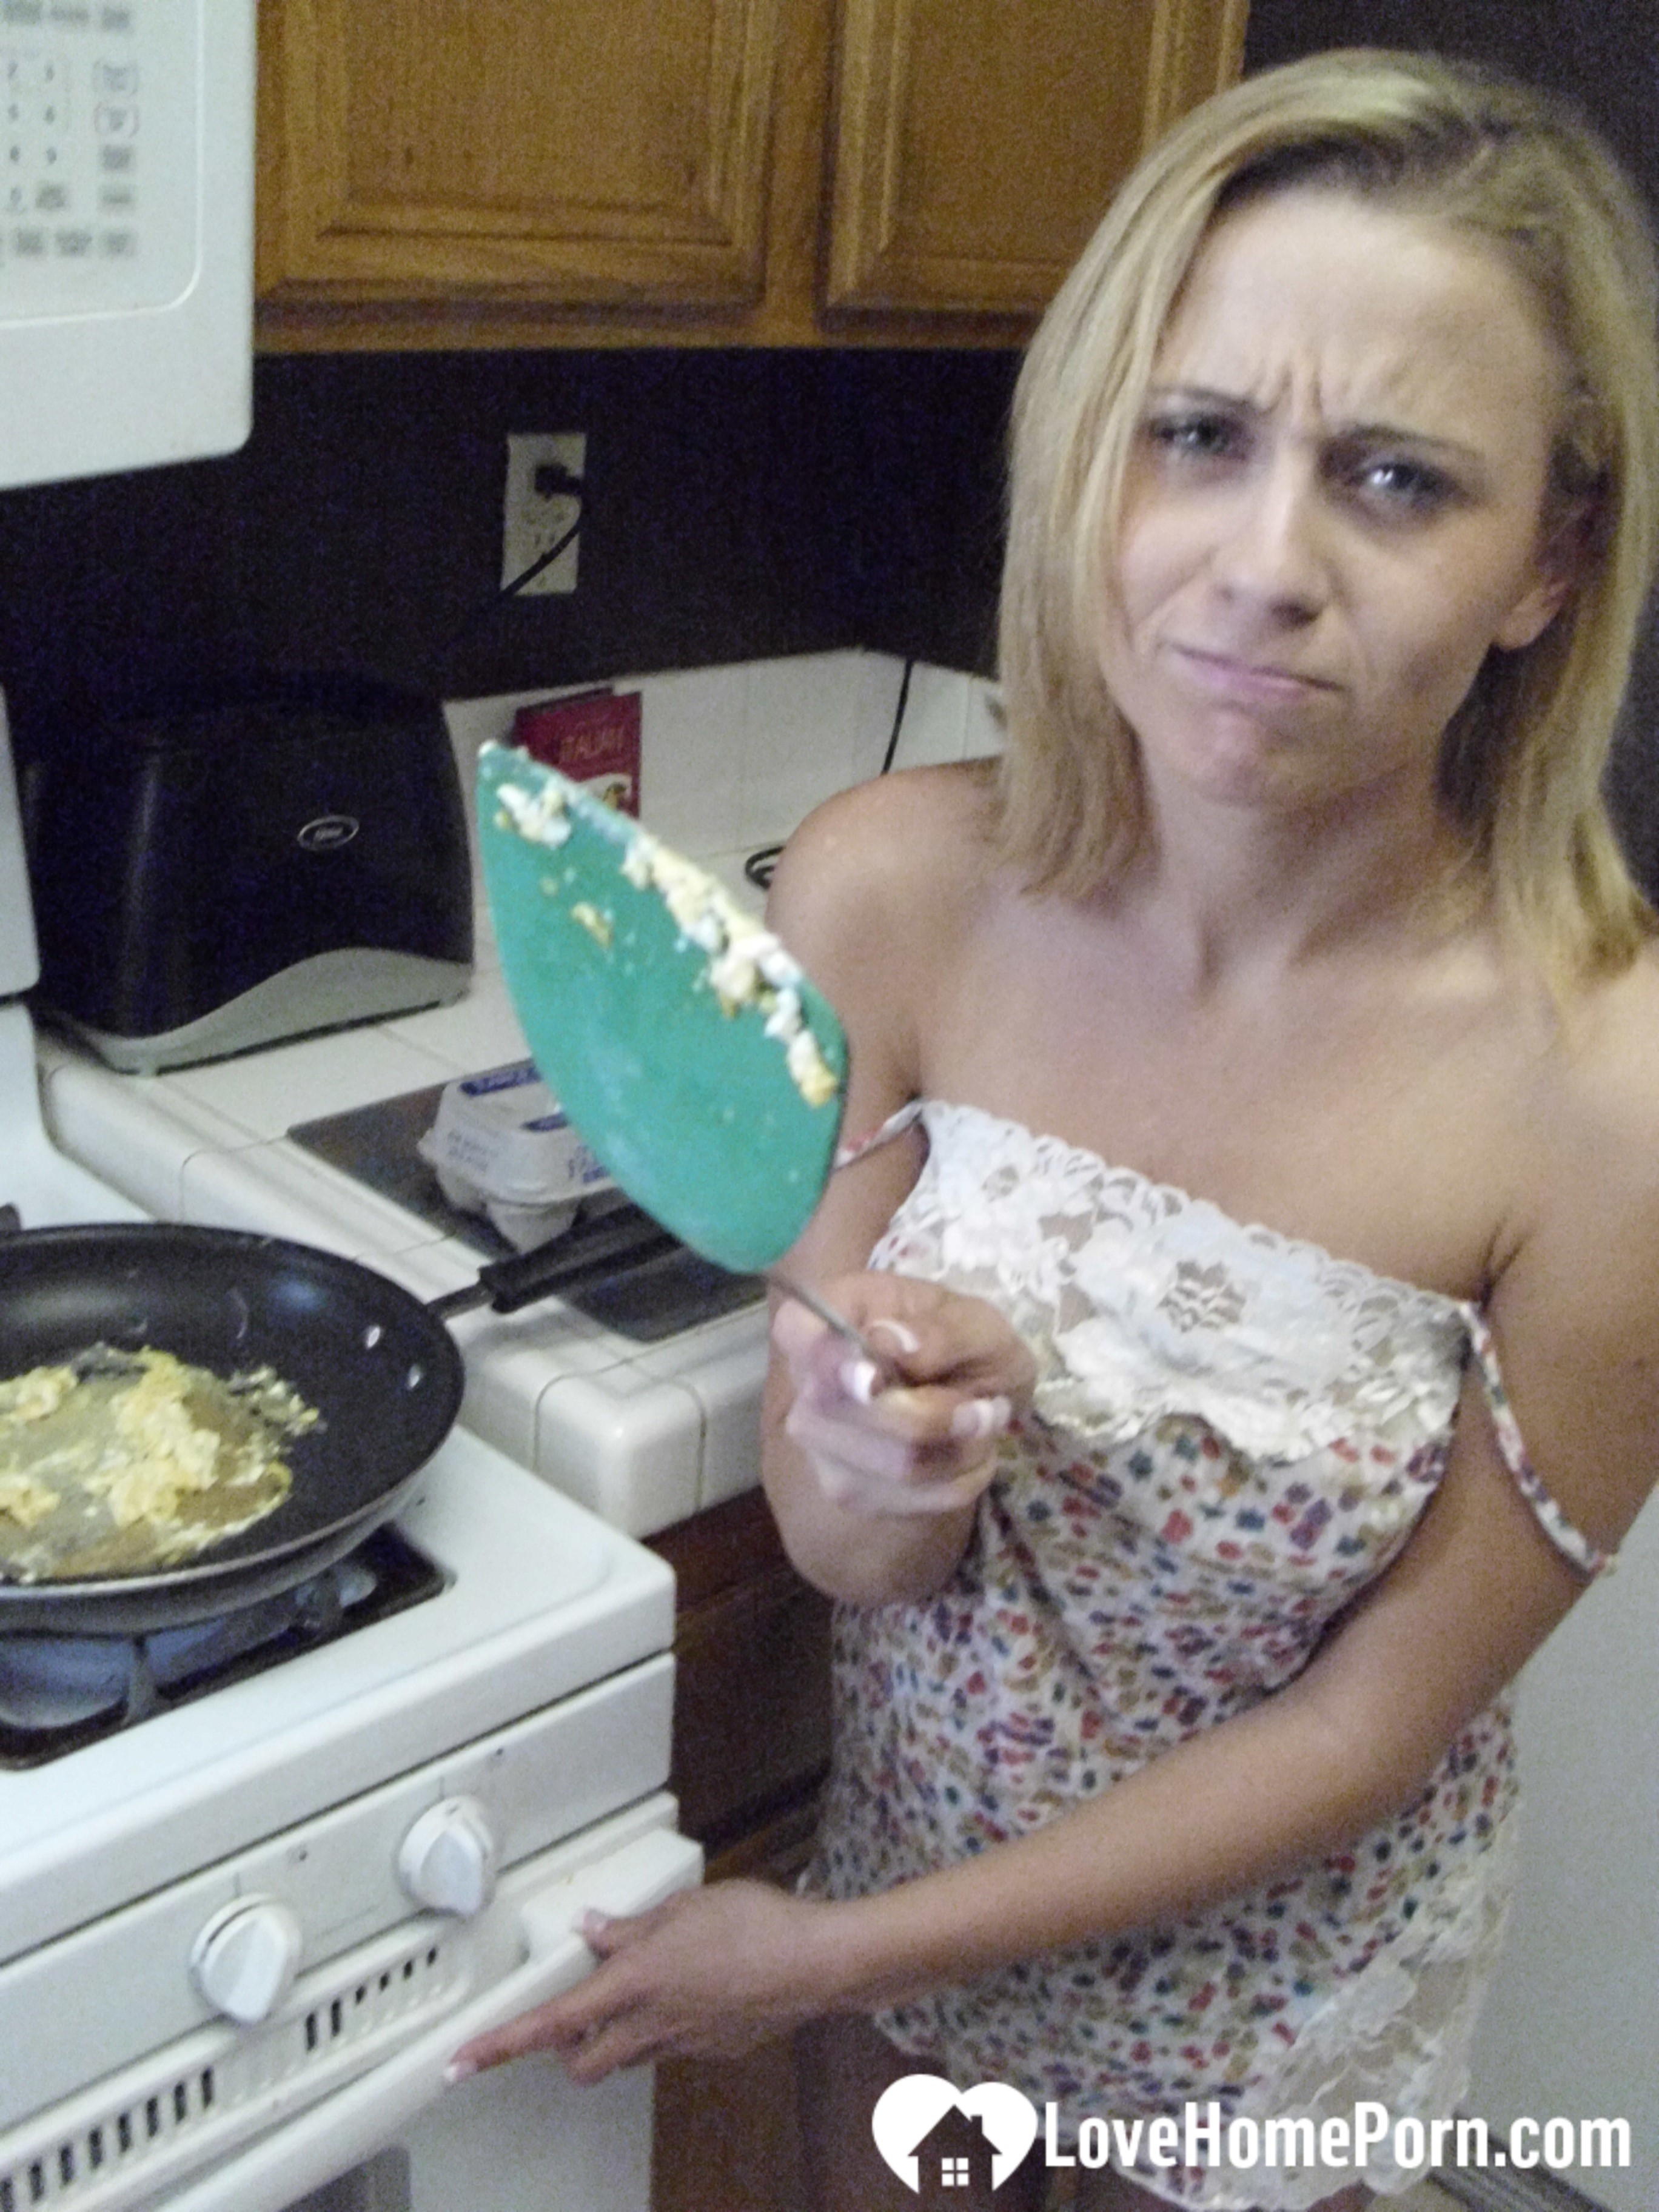 My wife really enjoys cooking while naked